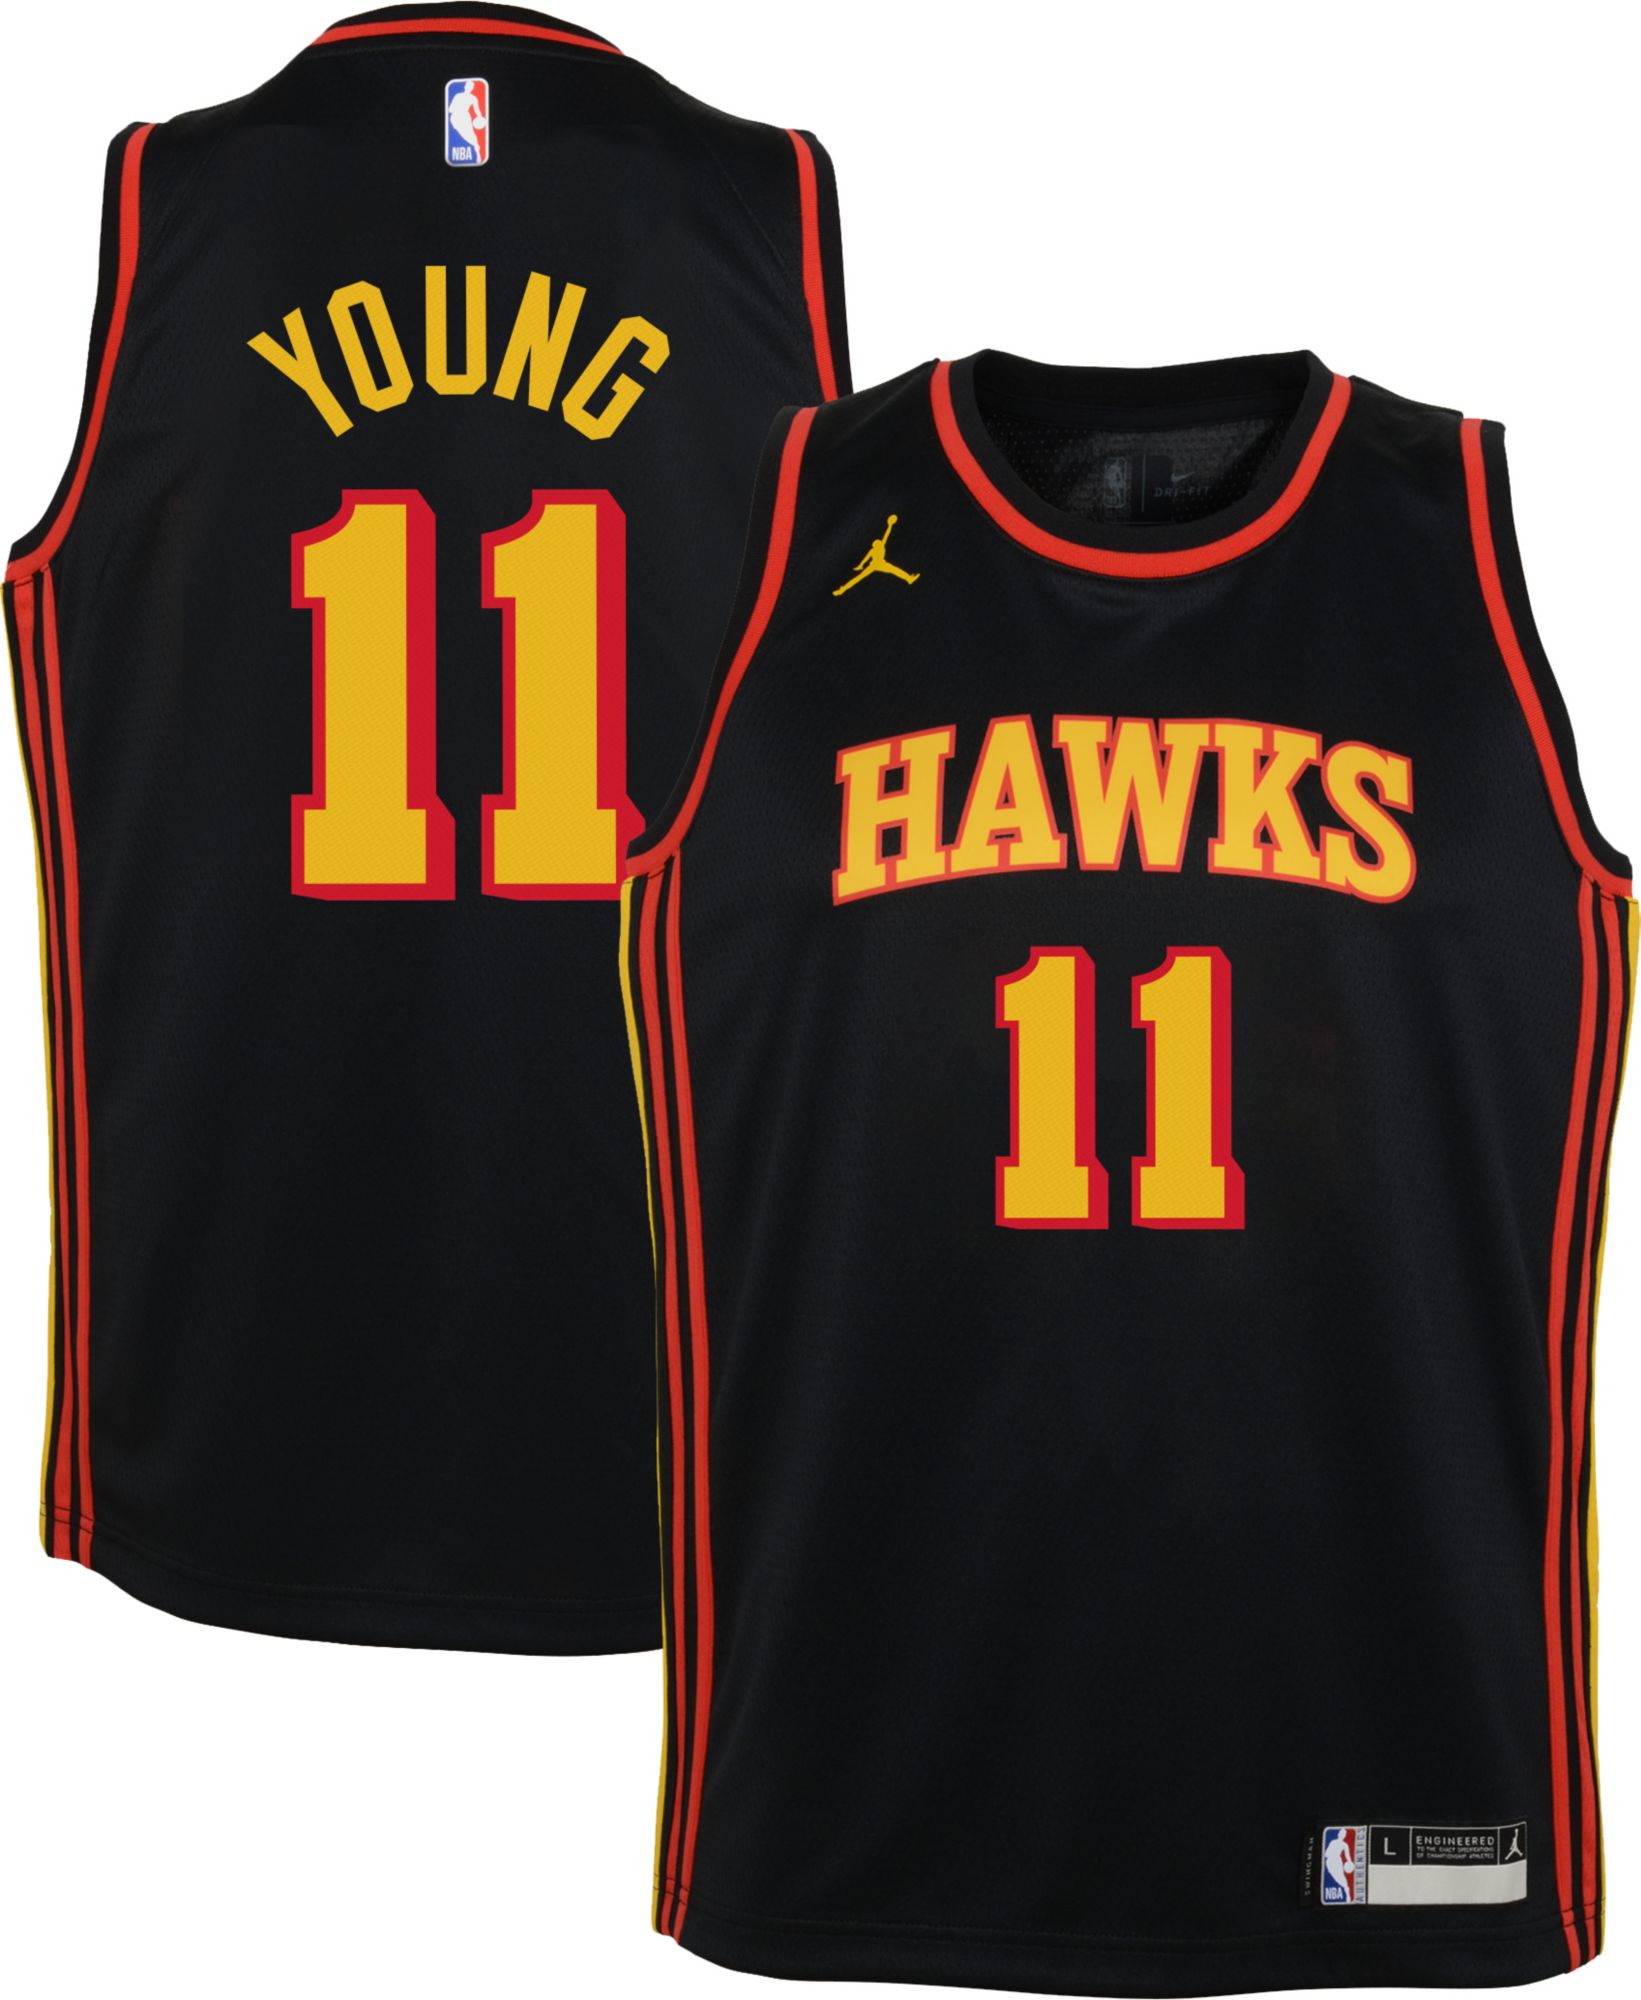 red trae young jersey